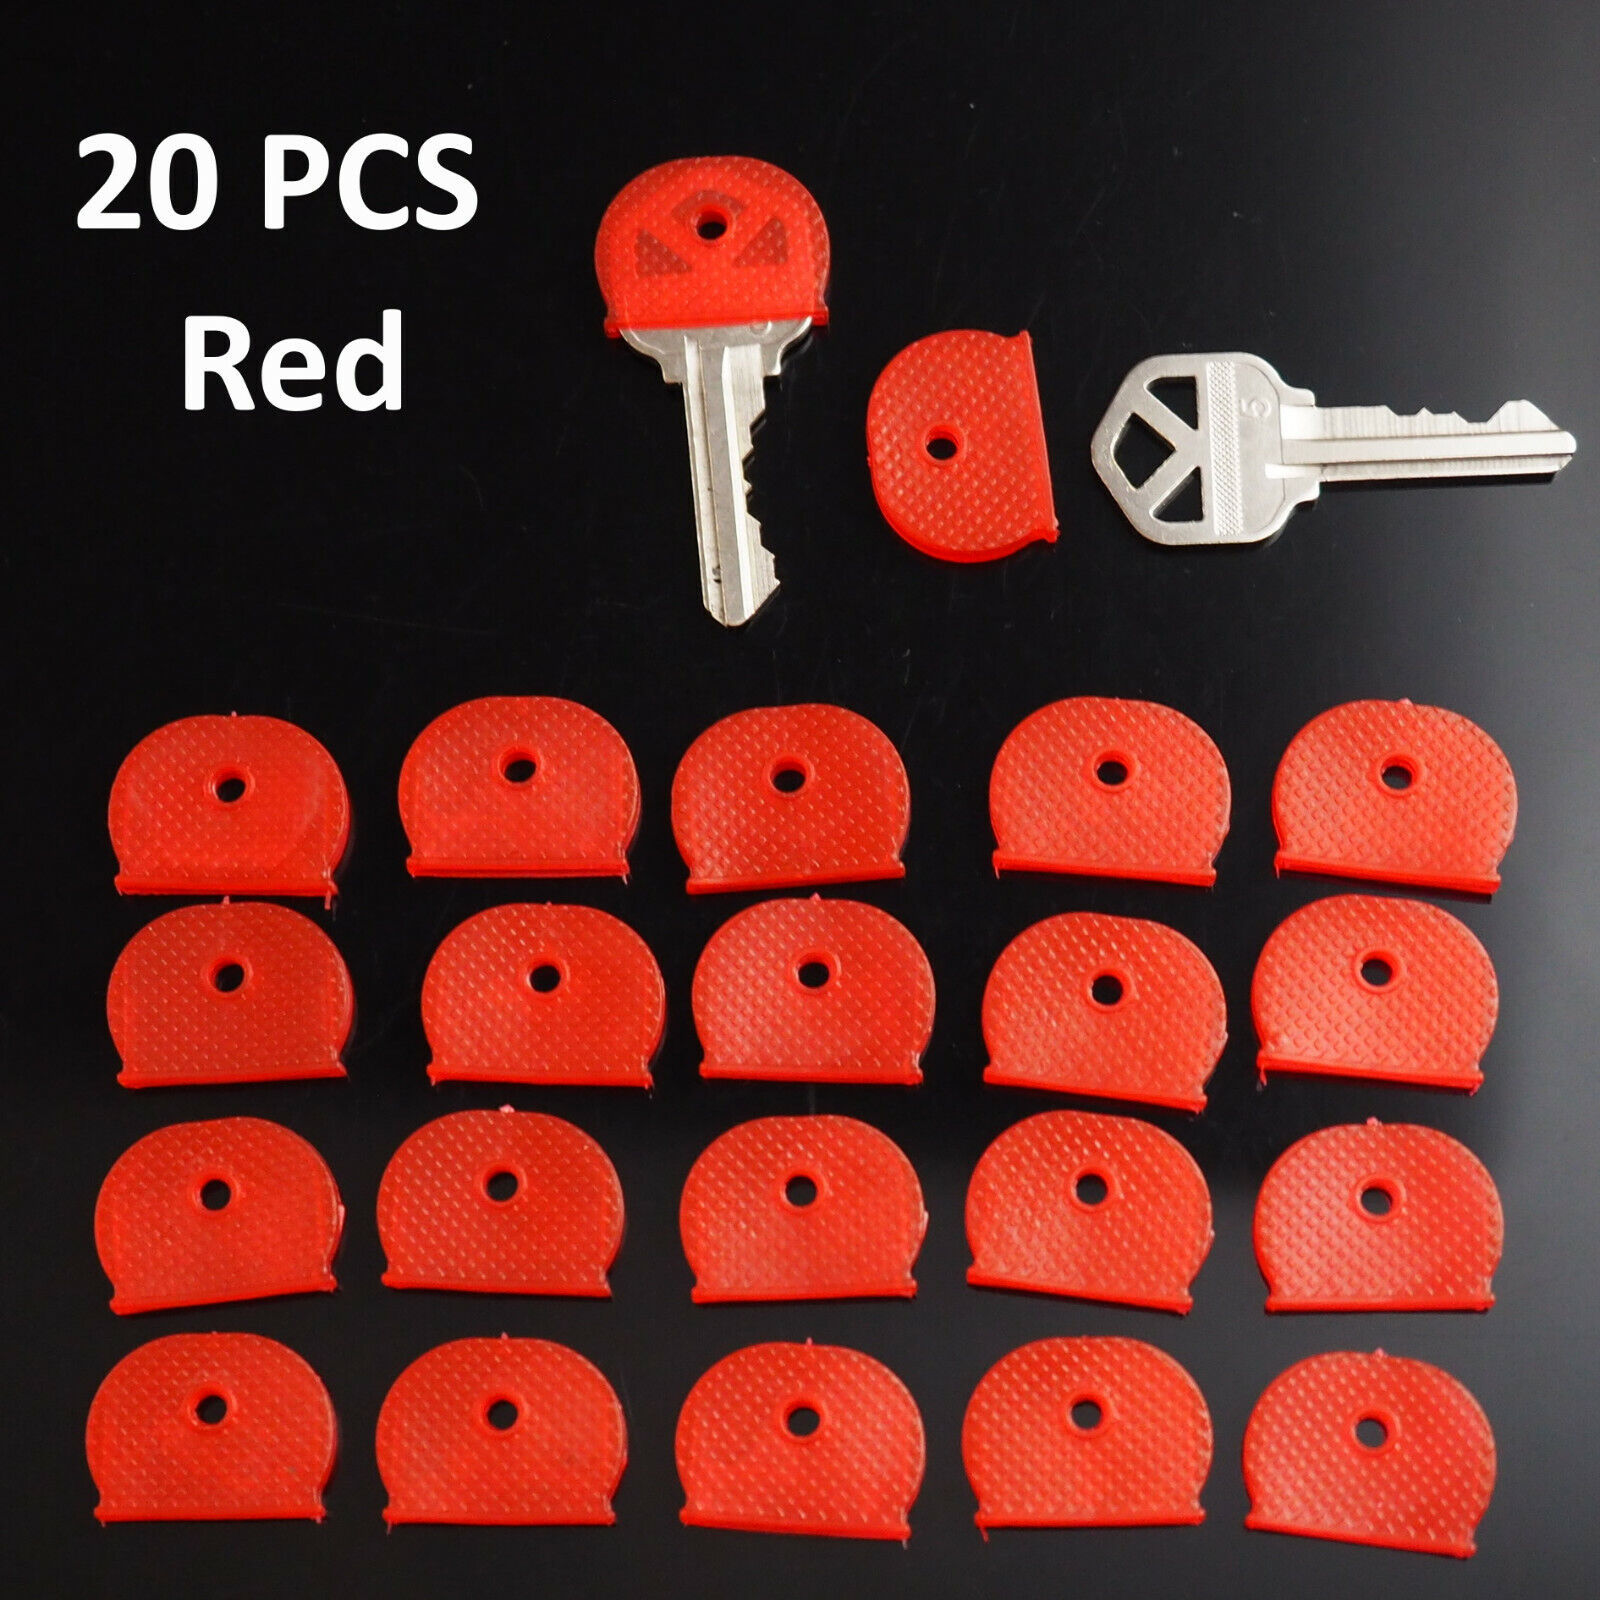 20x Key ID Caps Rubber Identifier Top Cover Topper Ring Hat Shape - Red Color